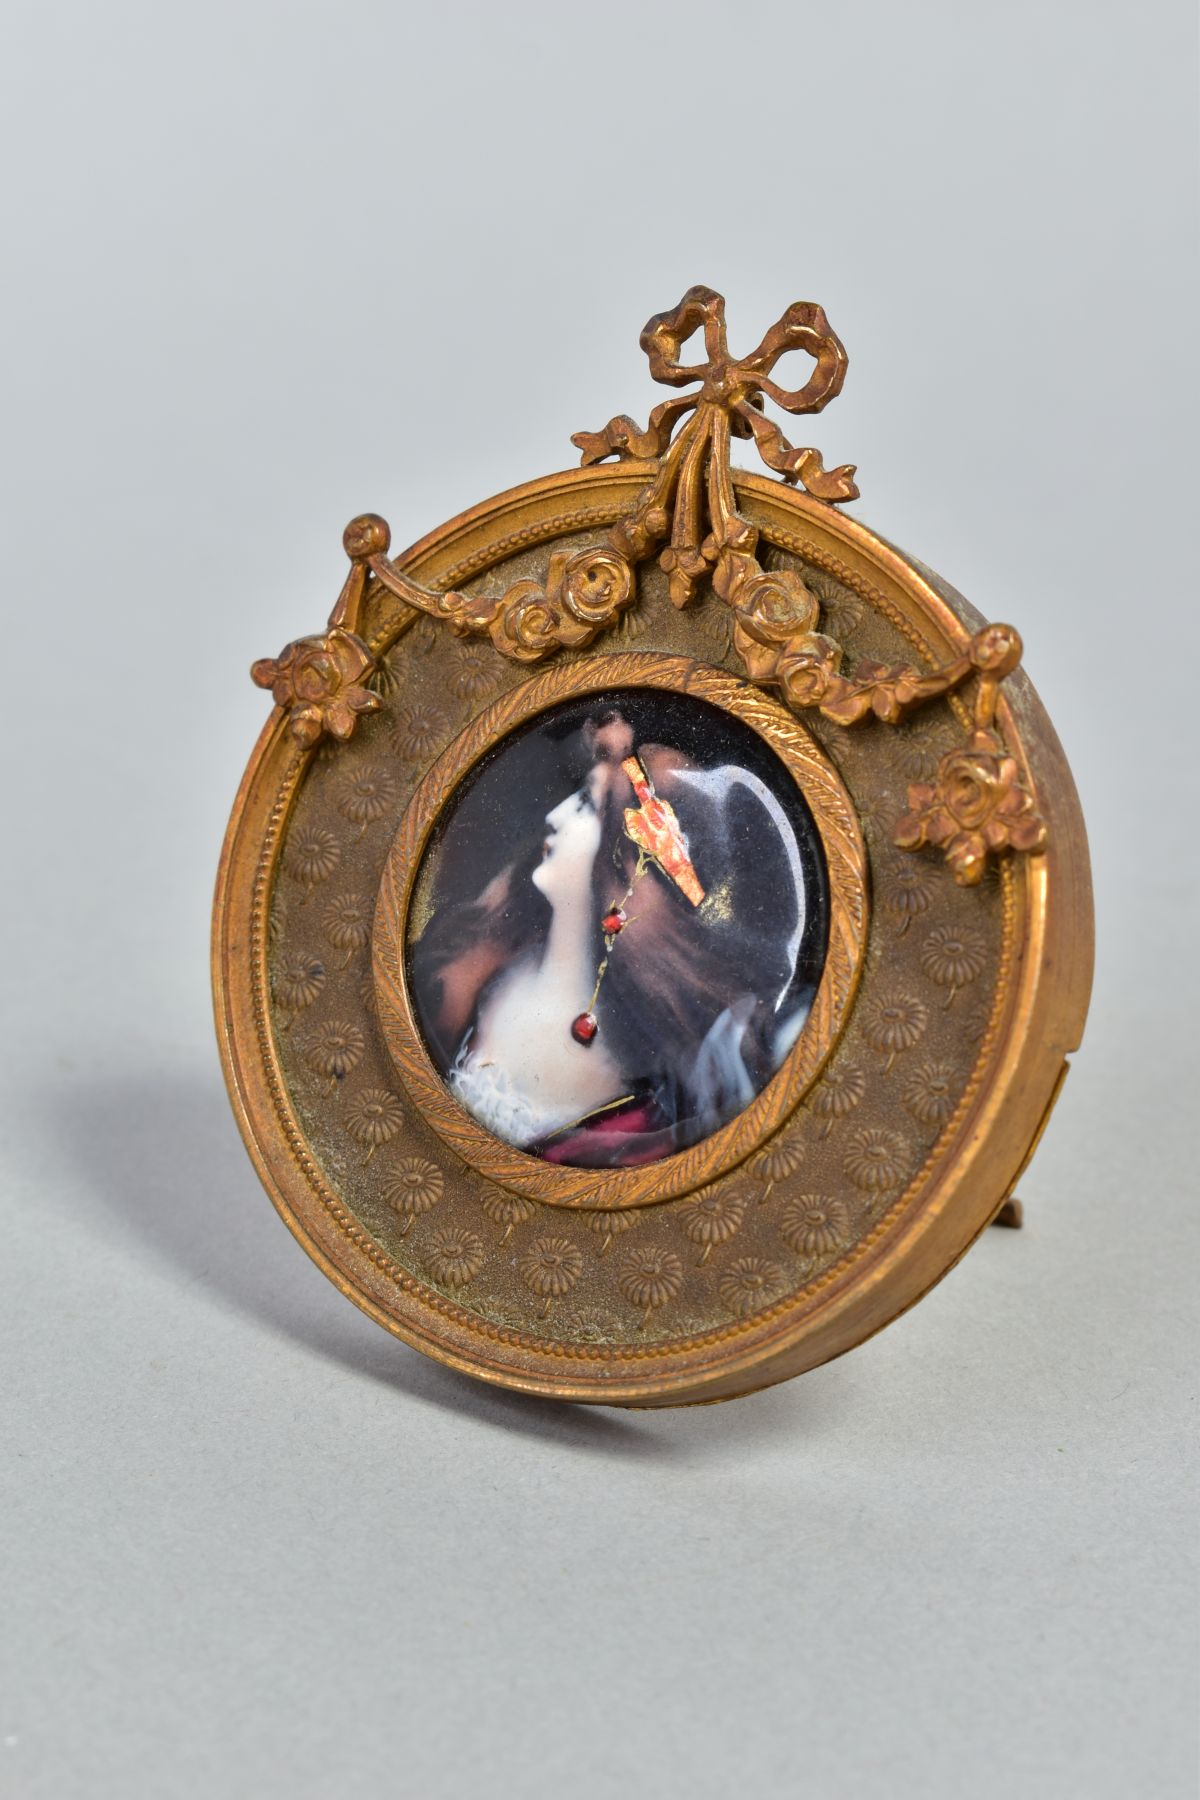 AN EARLY 20TH CENTURY FRENCH LIMOGES STYLE ENAMEL PORTRAIT PLAQUE OF A LADY, with ornate head dress, - Image 2 of 4